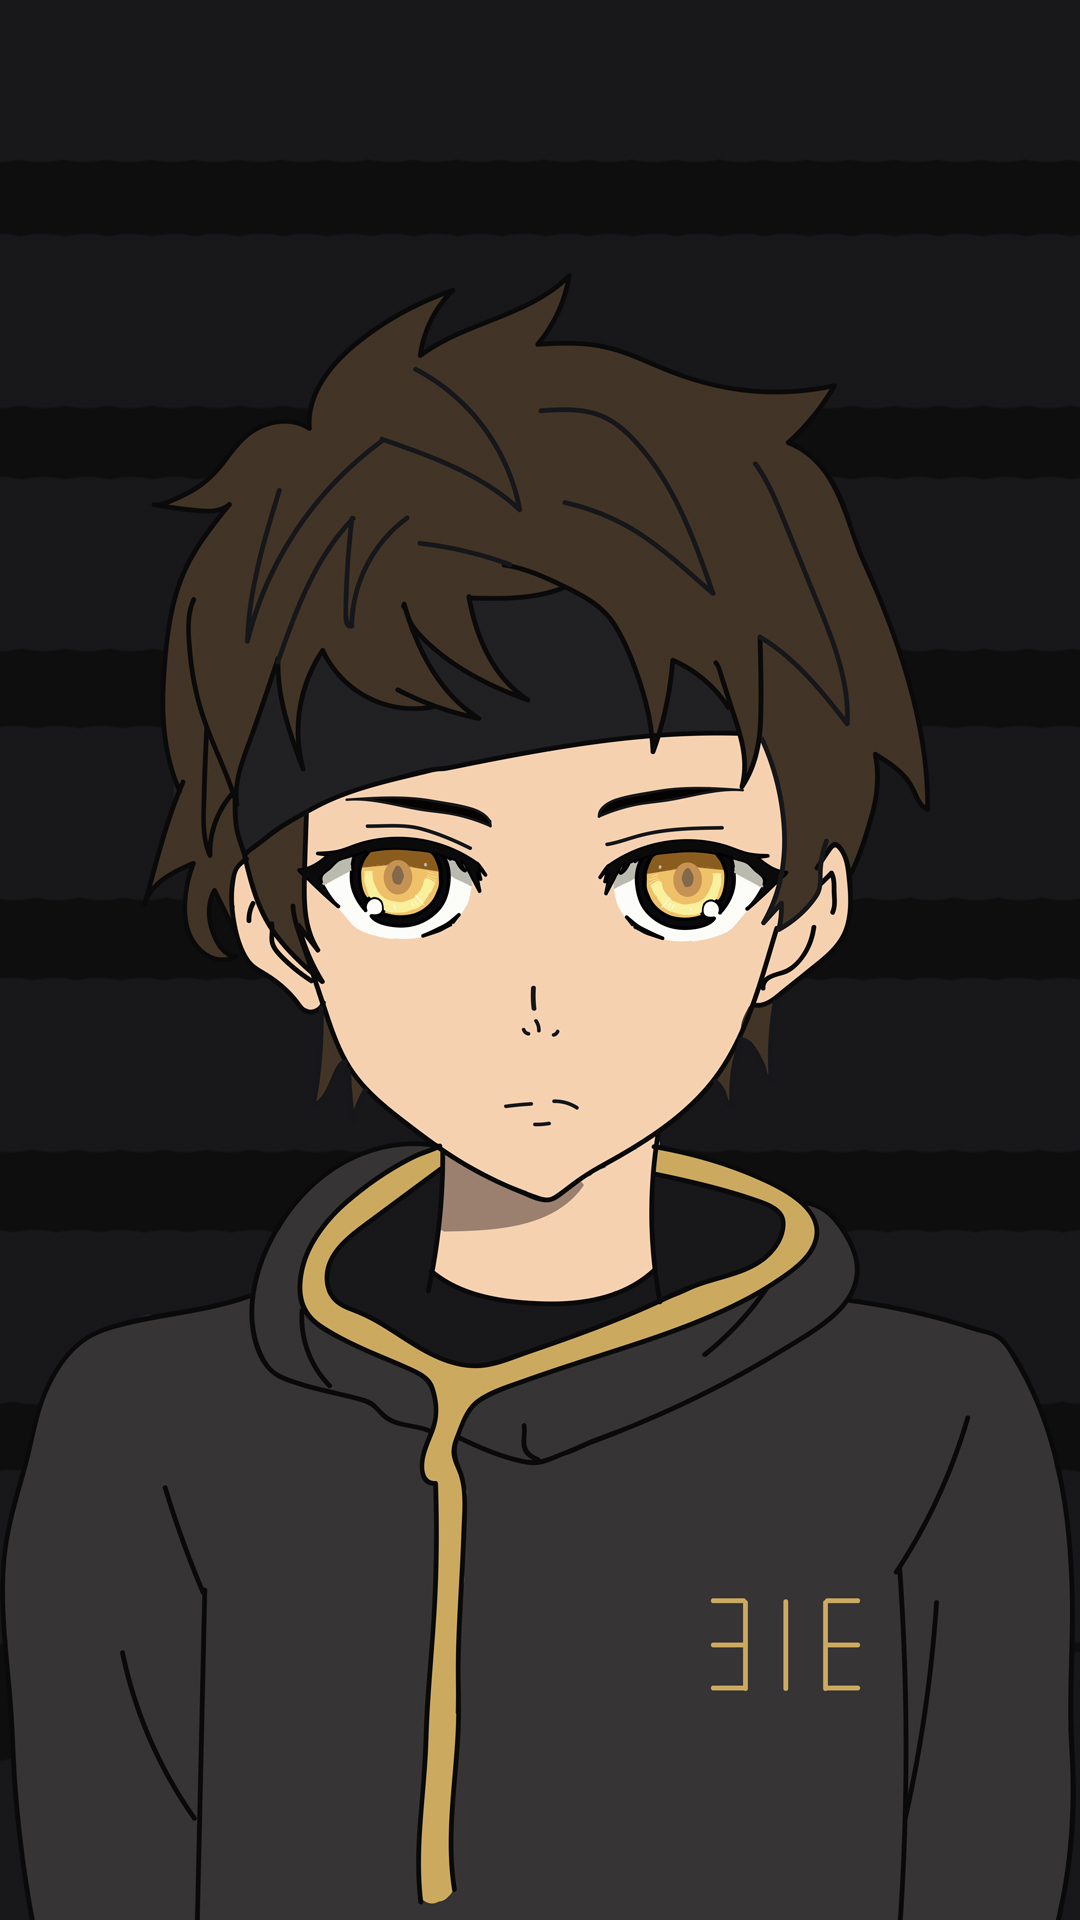 Baam Tower of god by kidflash013